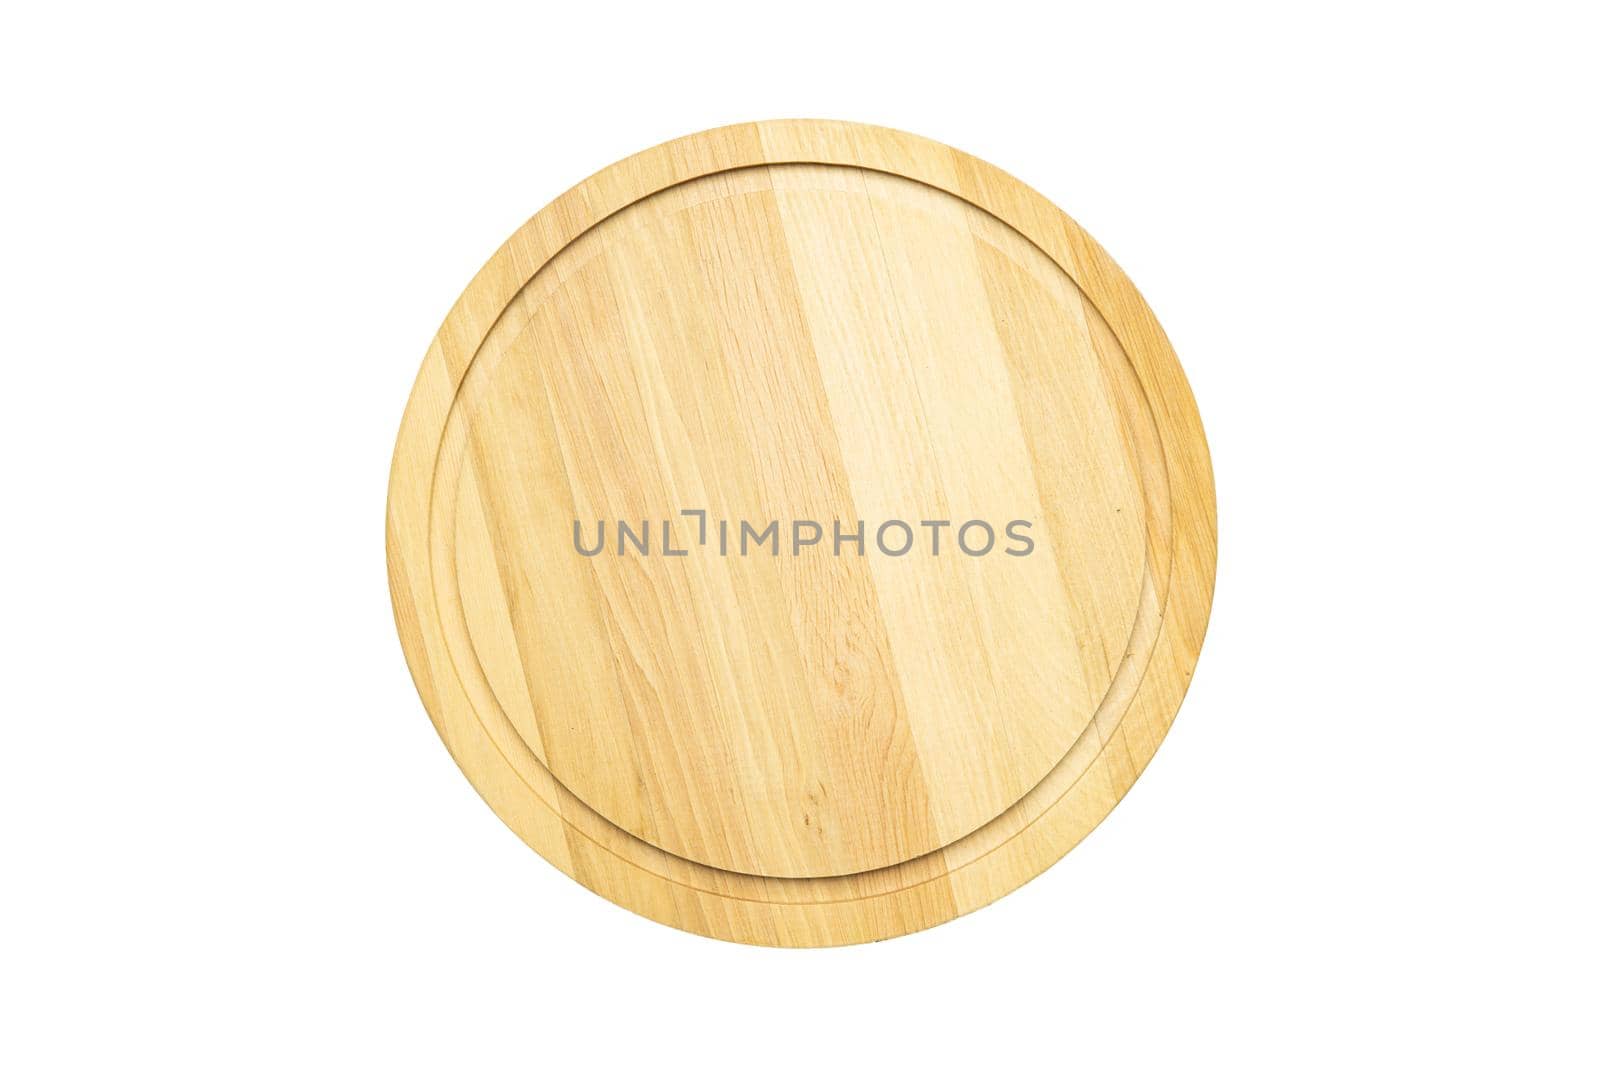 Wooden tray cutting board isolated on white background mock up by katrinaera